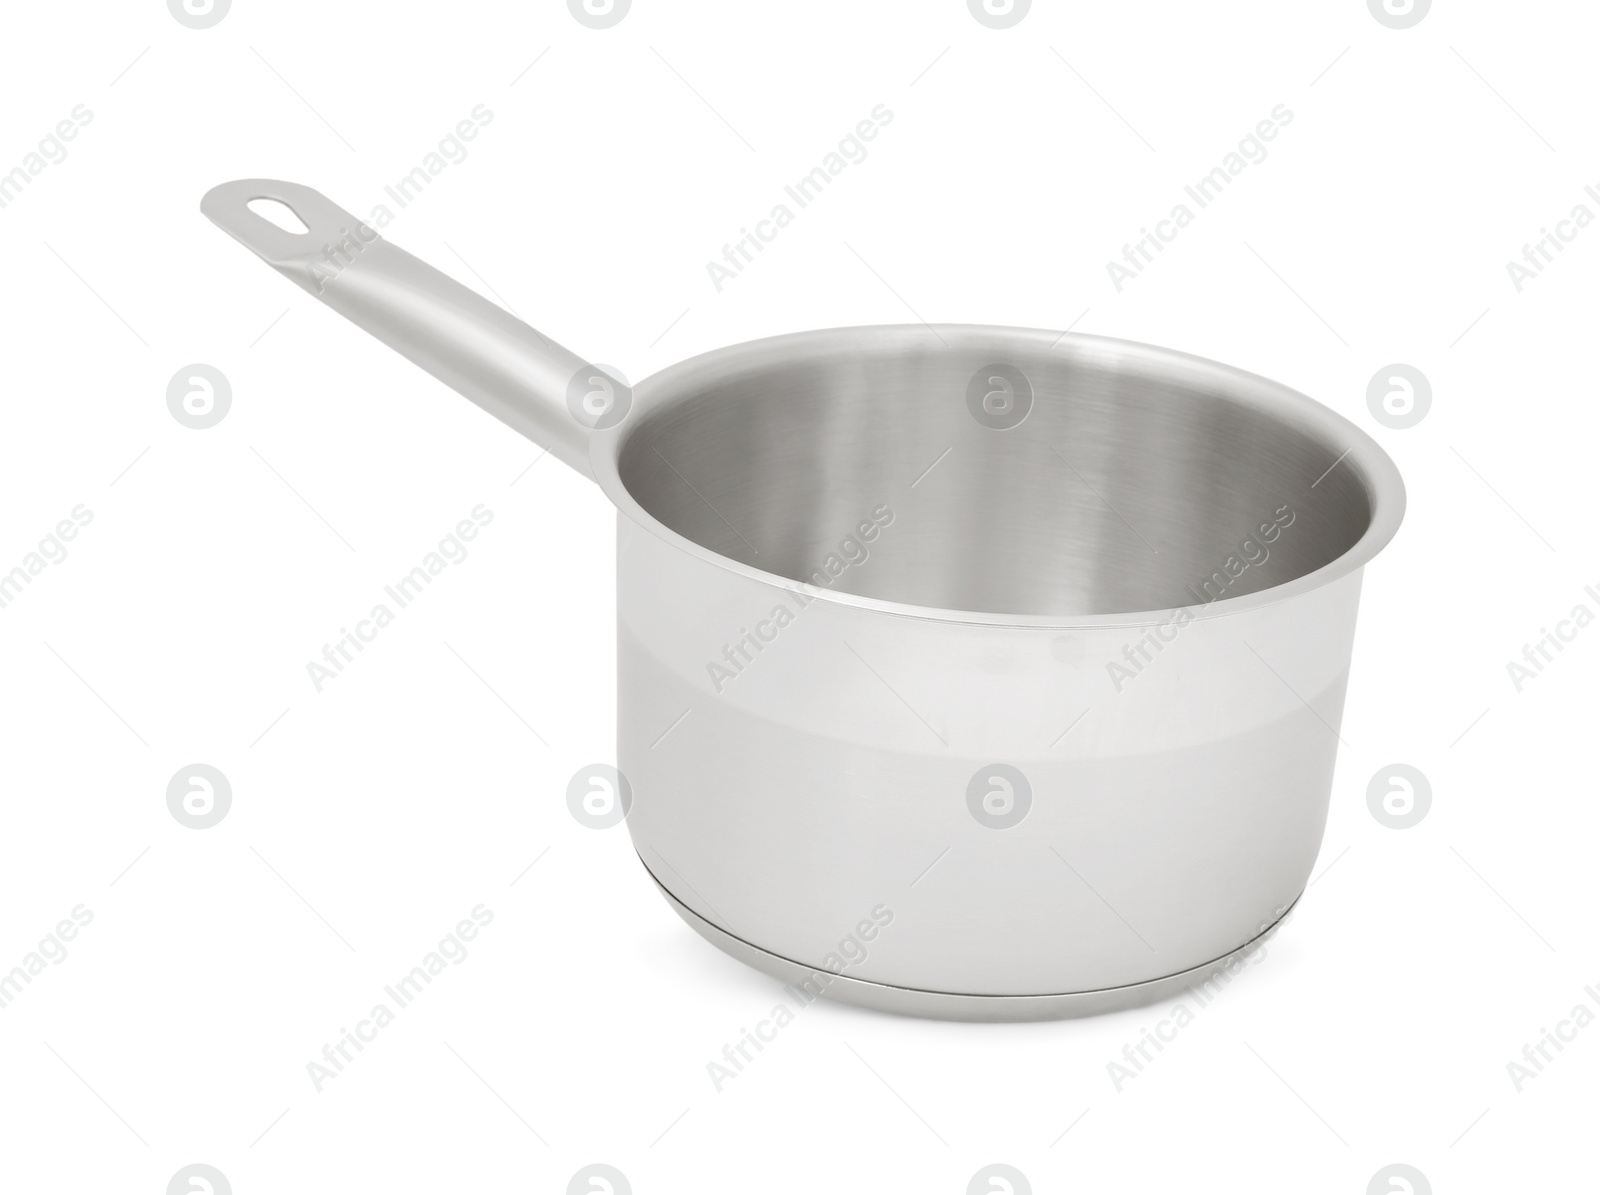 Photo of One stainless steel saucepan isolated on white